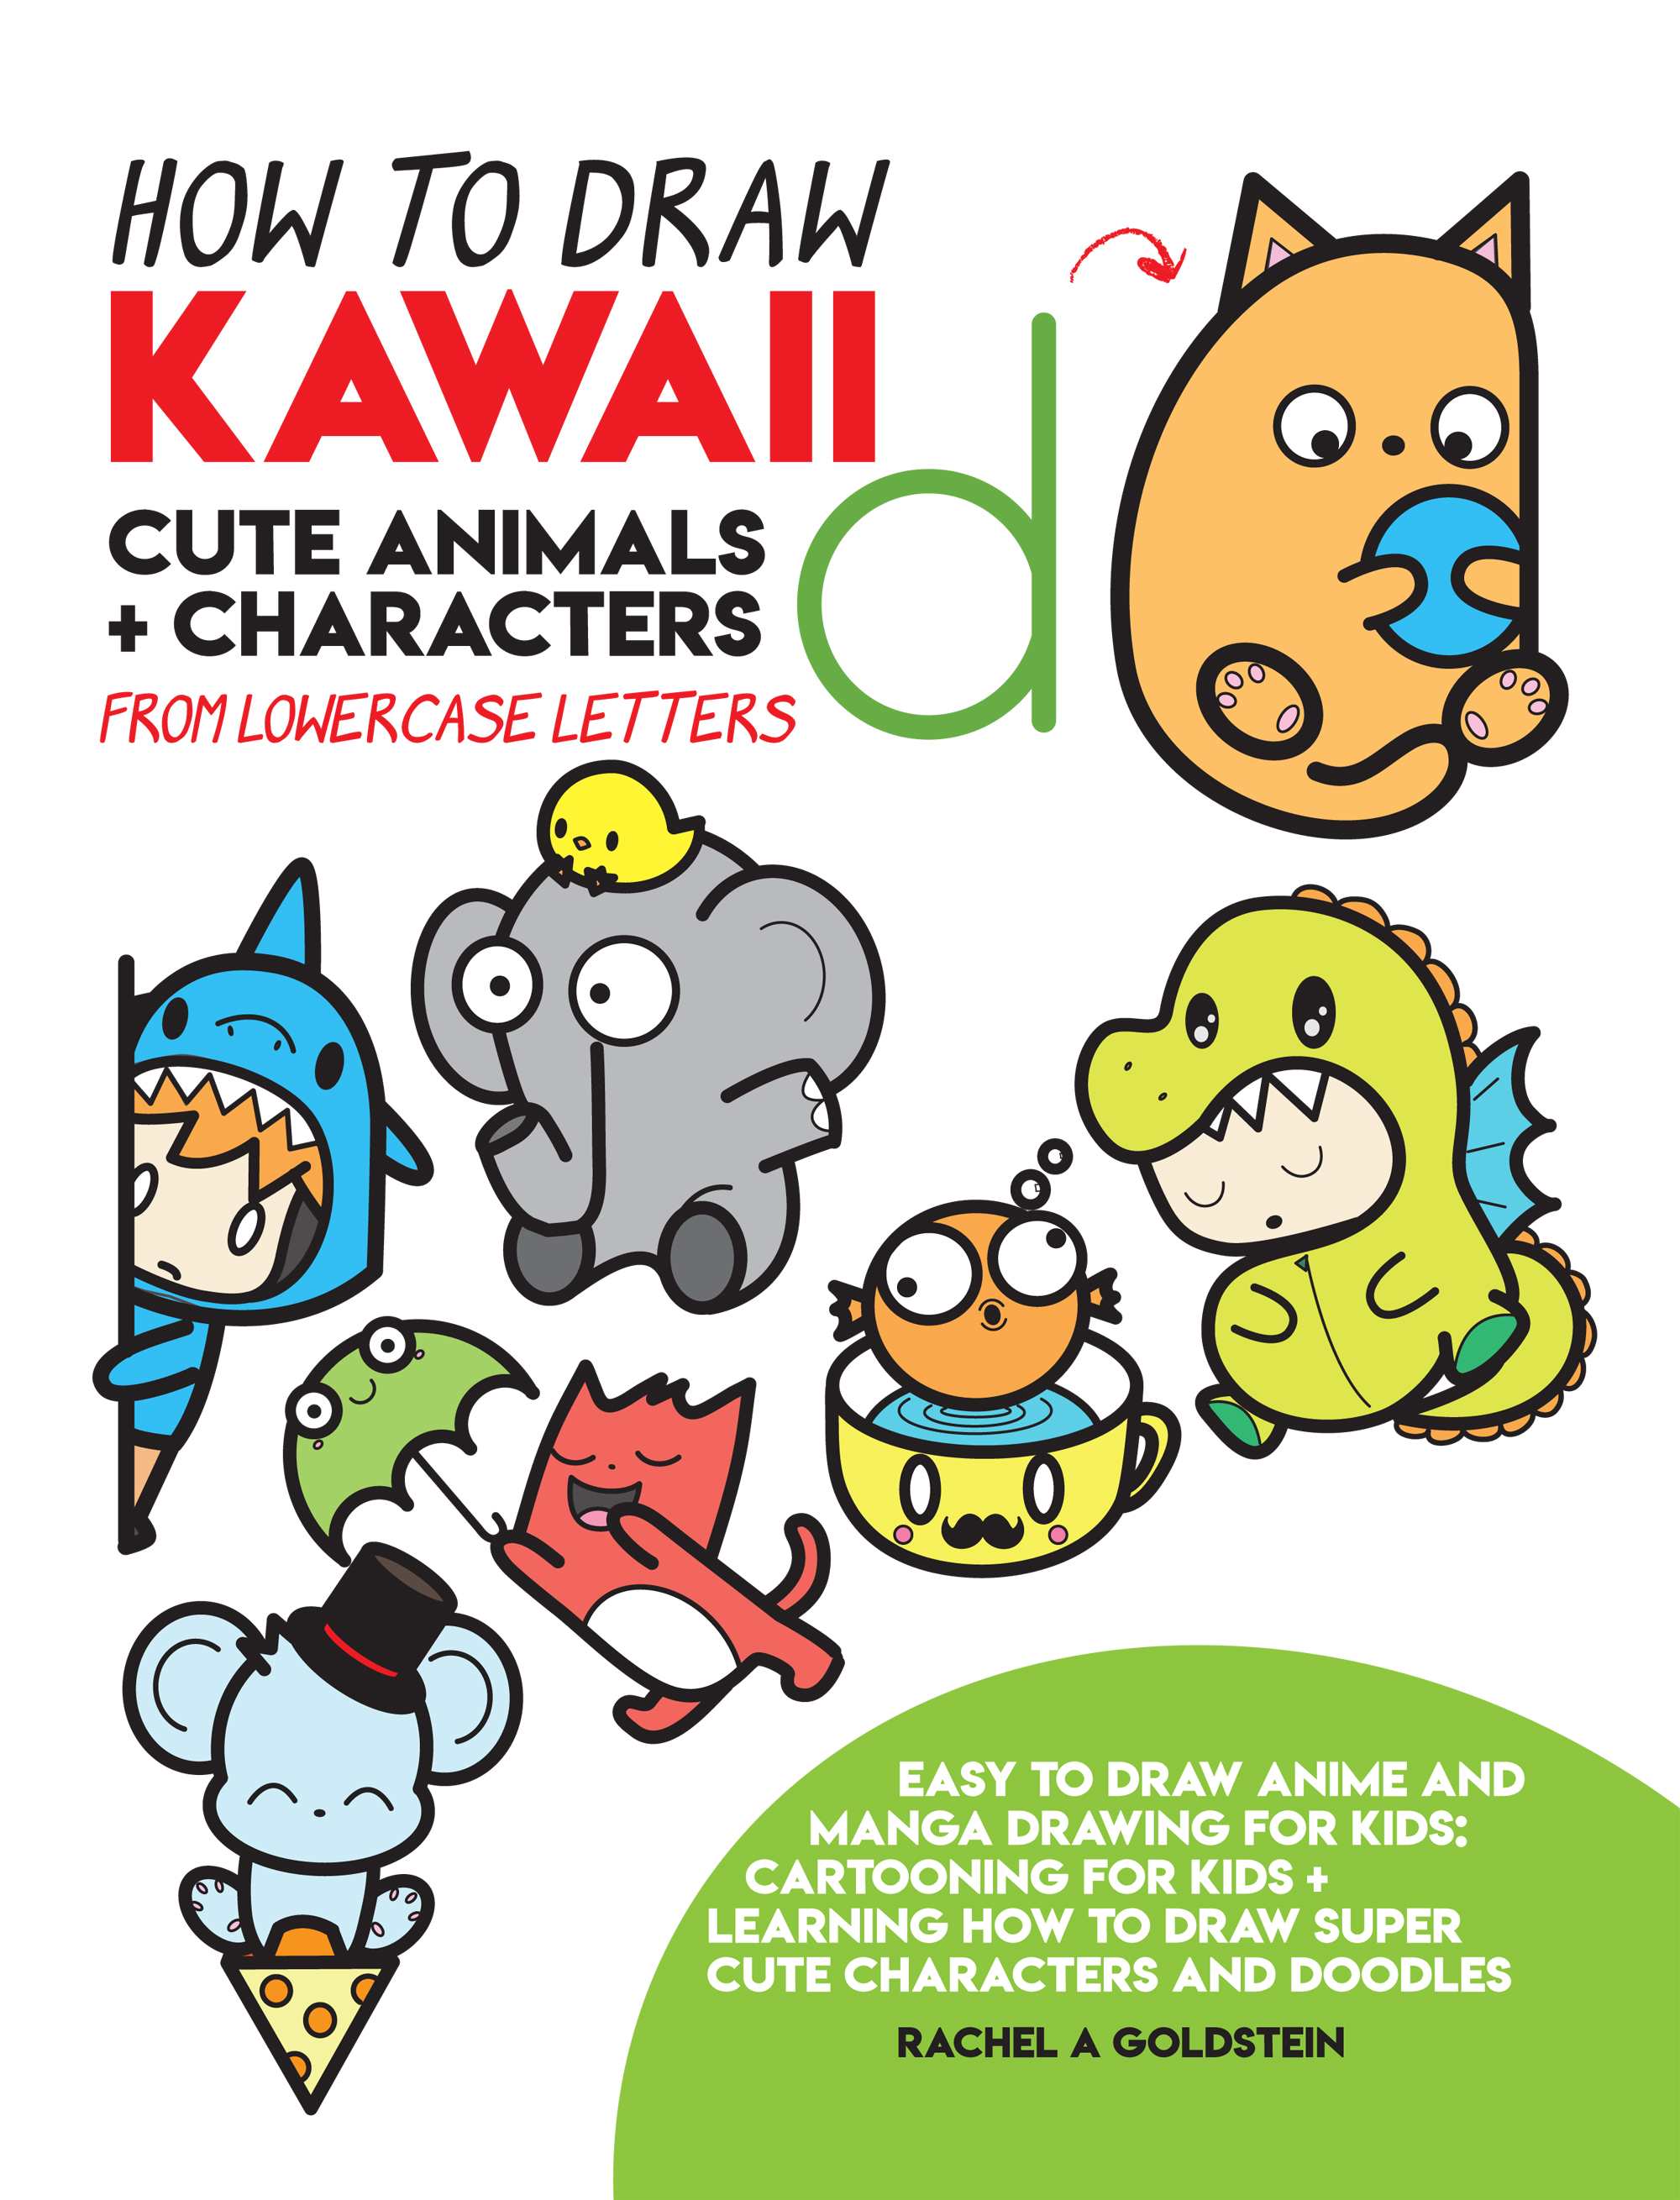 Drawing Kawaii Cute Animals, Characters from Lowercase Letters 4 How